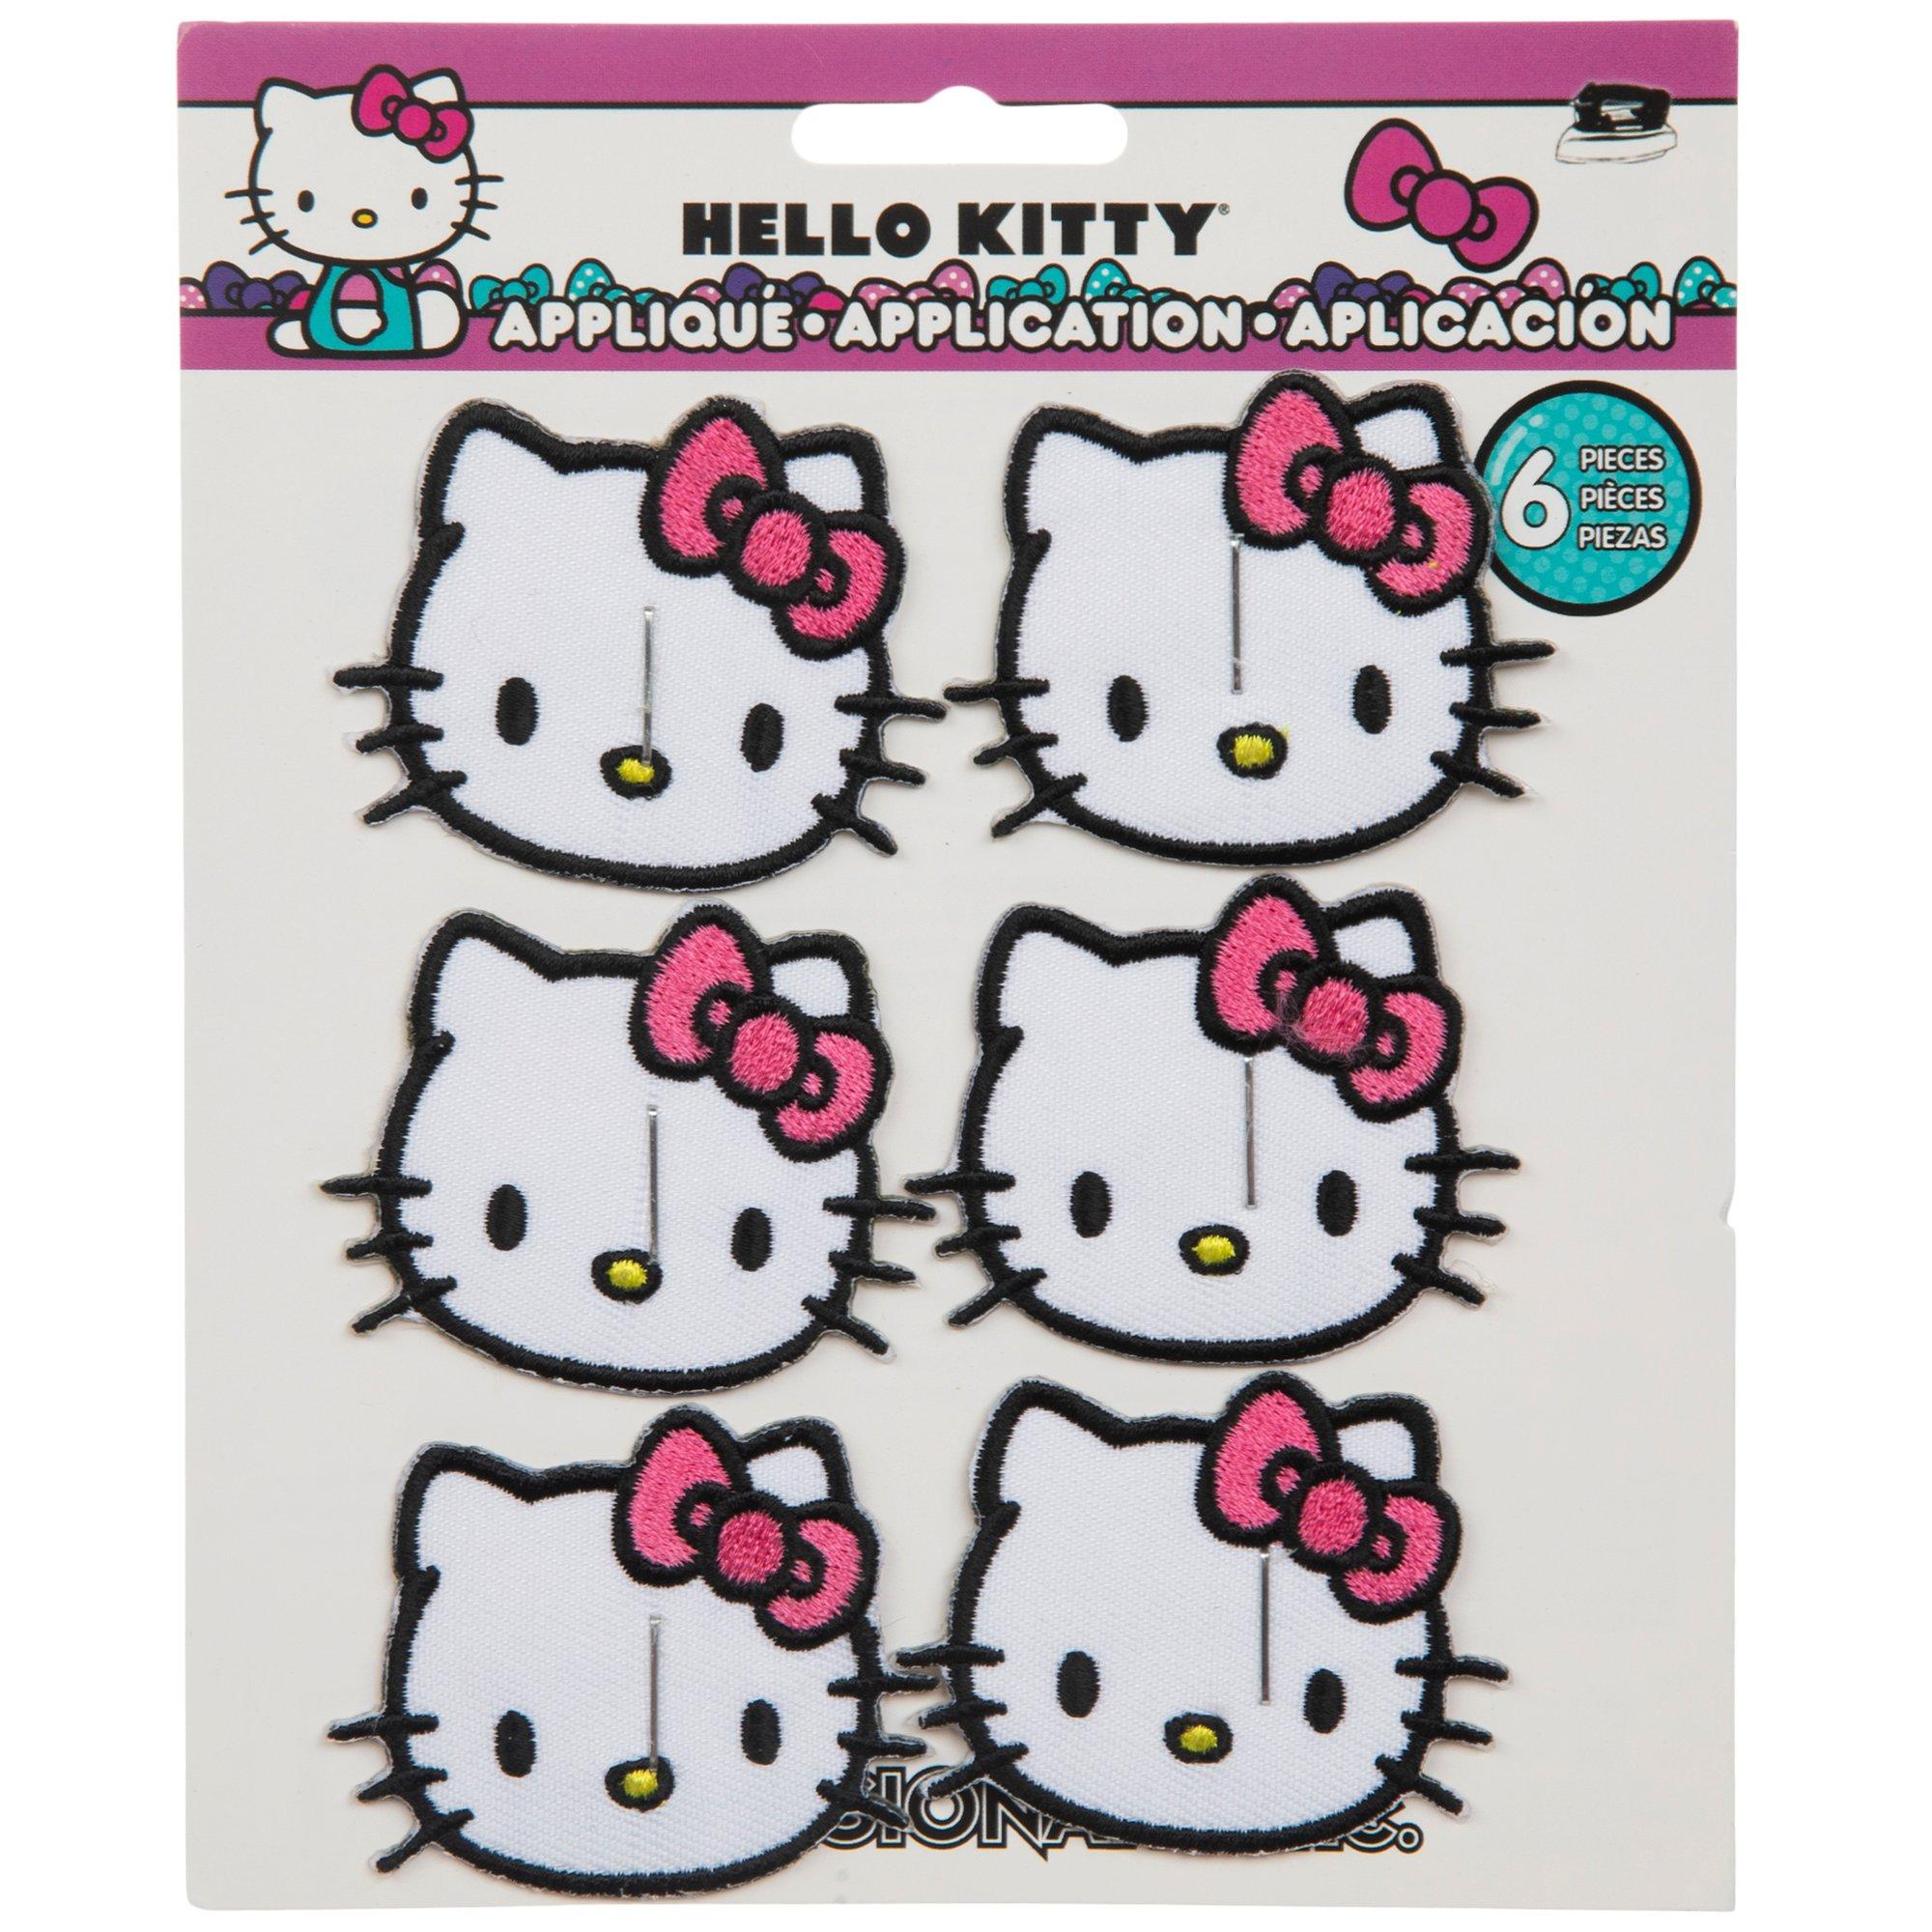 Set Of 5 Collectible Hello Kitty & Friends Sanrio Kawaii Iron On Patches 